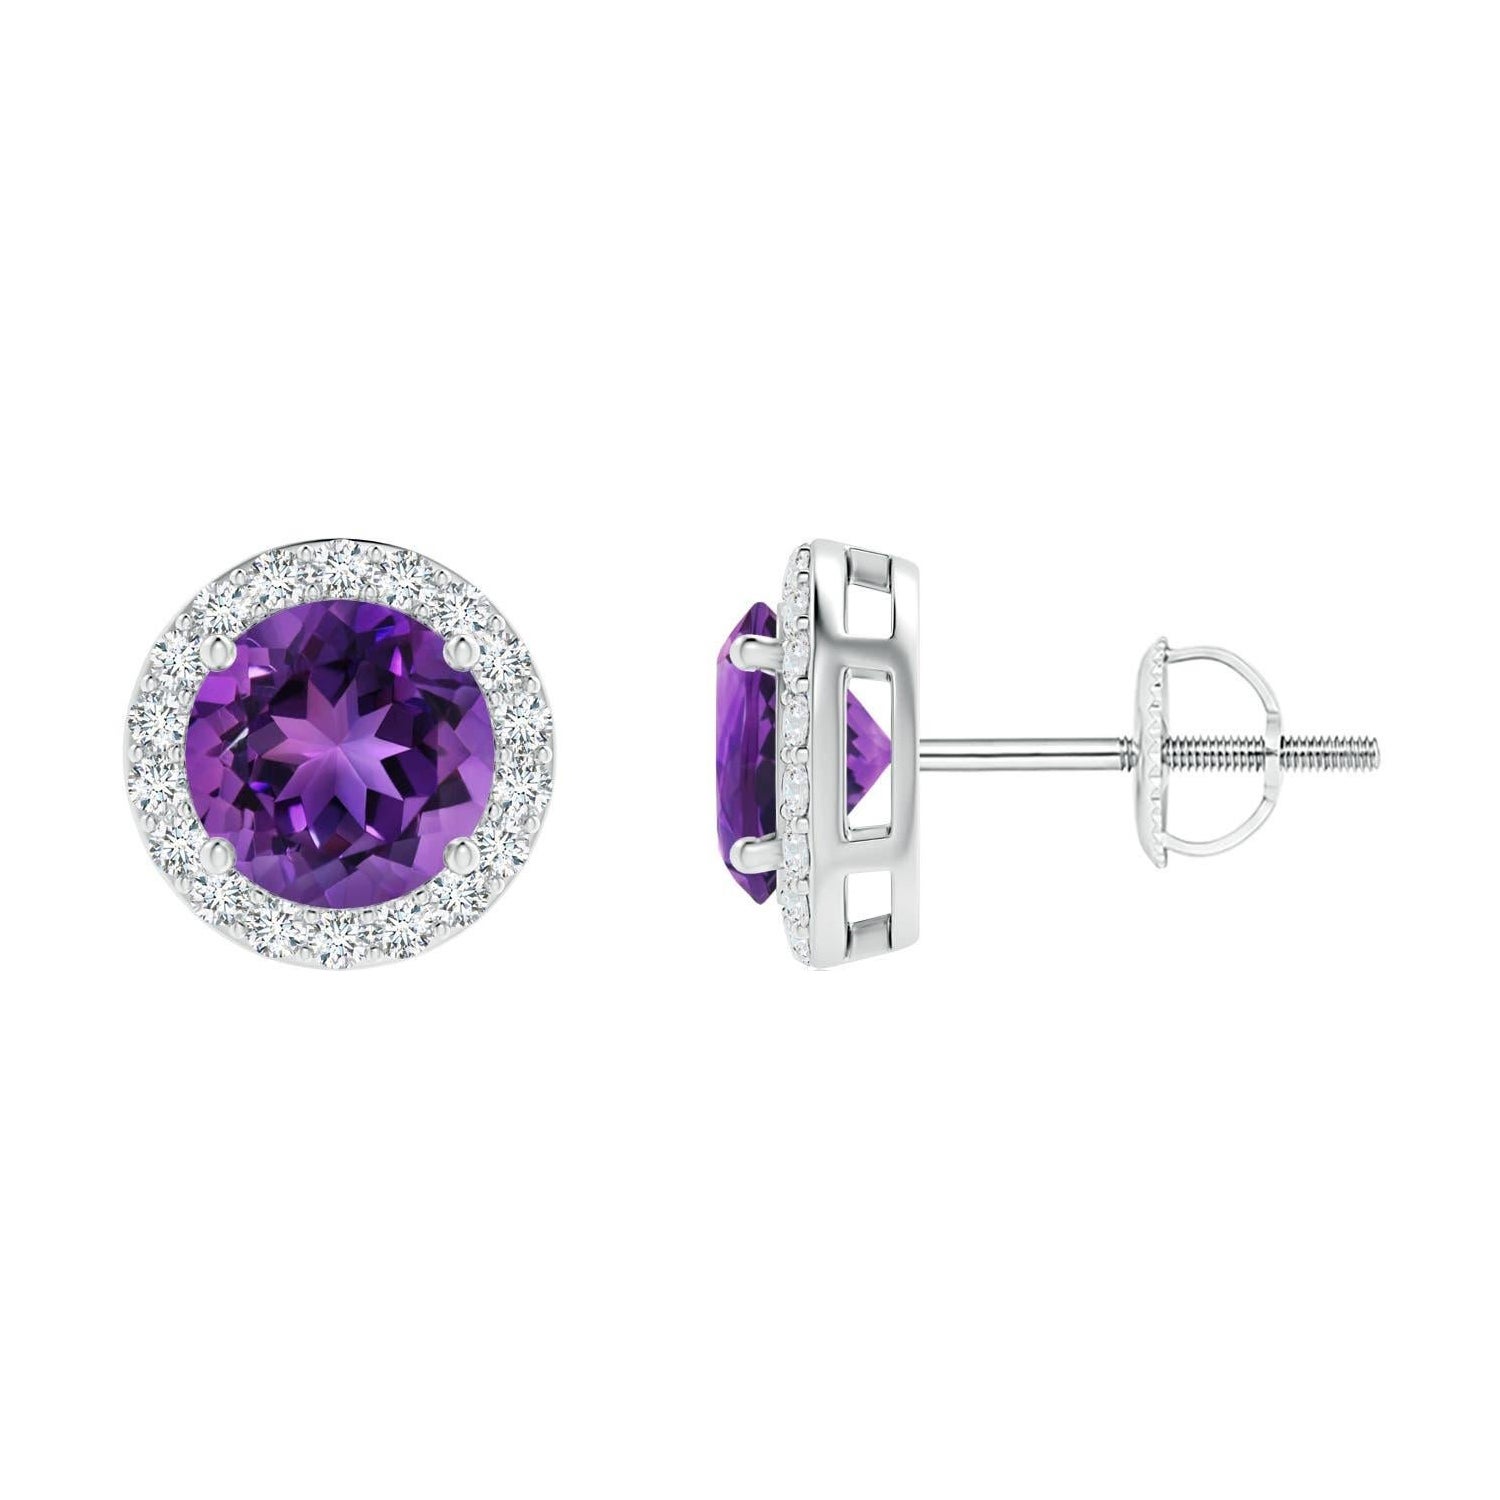 Natural Vintage Round 1.6ct Amethyst Halo Stud Earrings in 14K White Gold For Sale